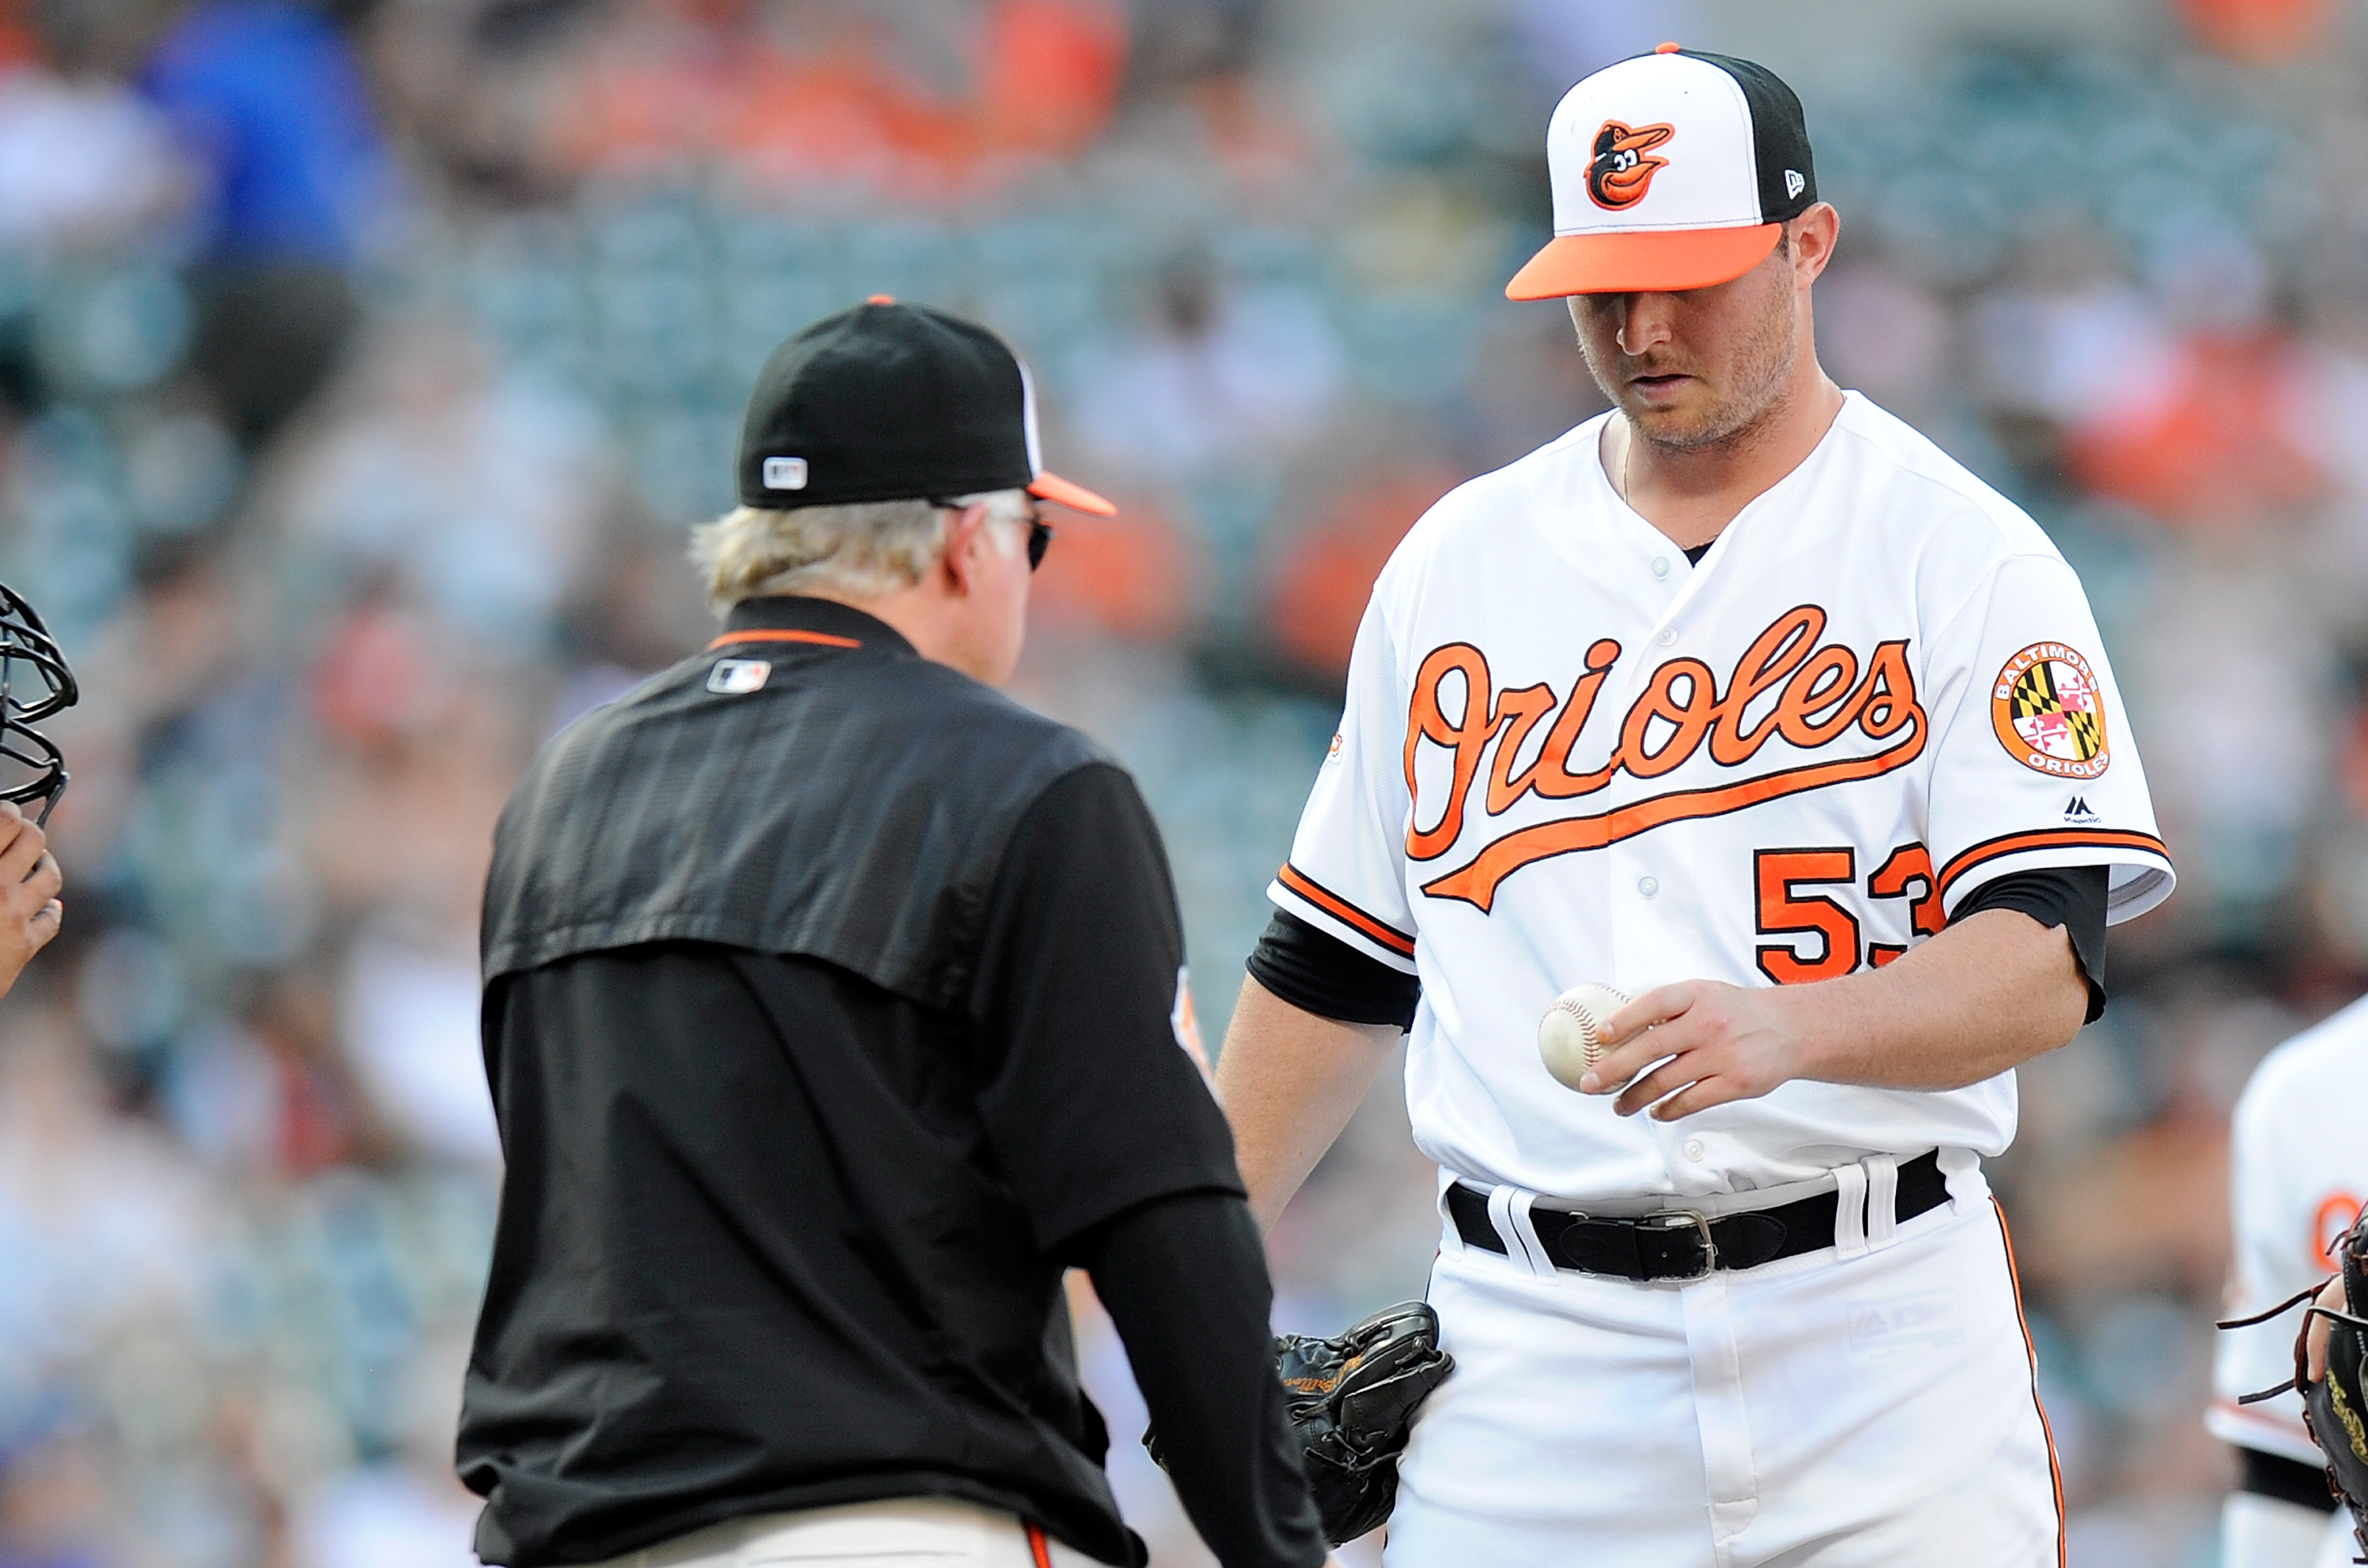 Looking back on the Orioles Zack Britton trade return, one year